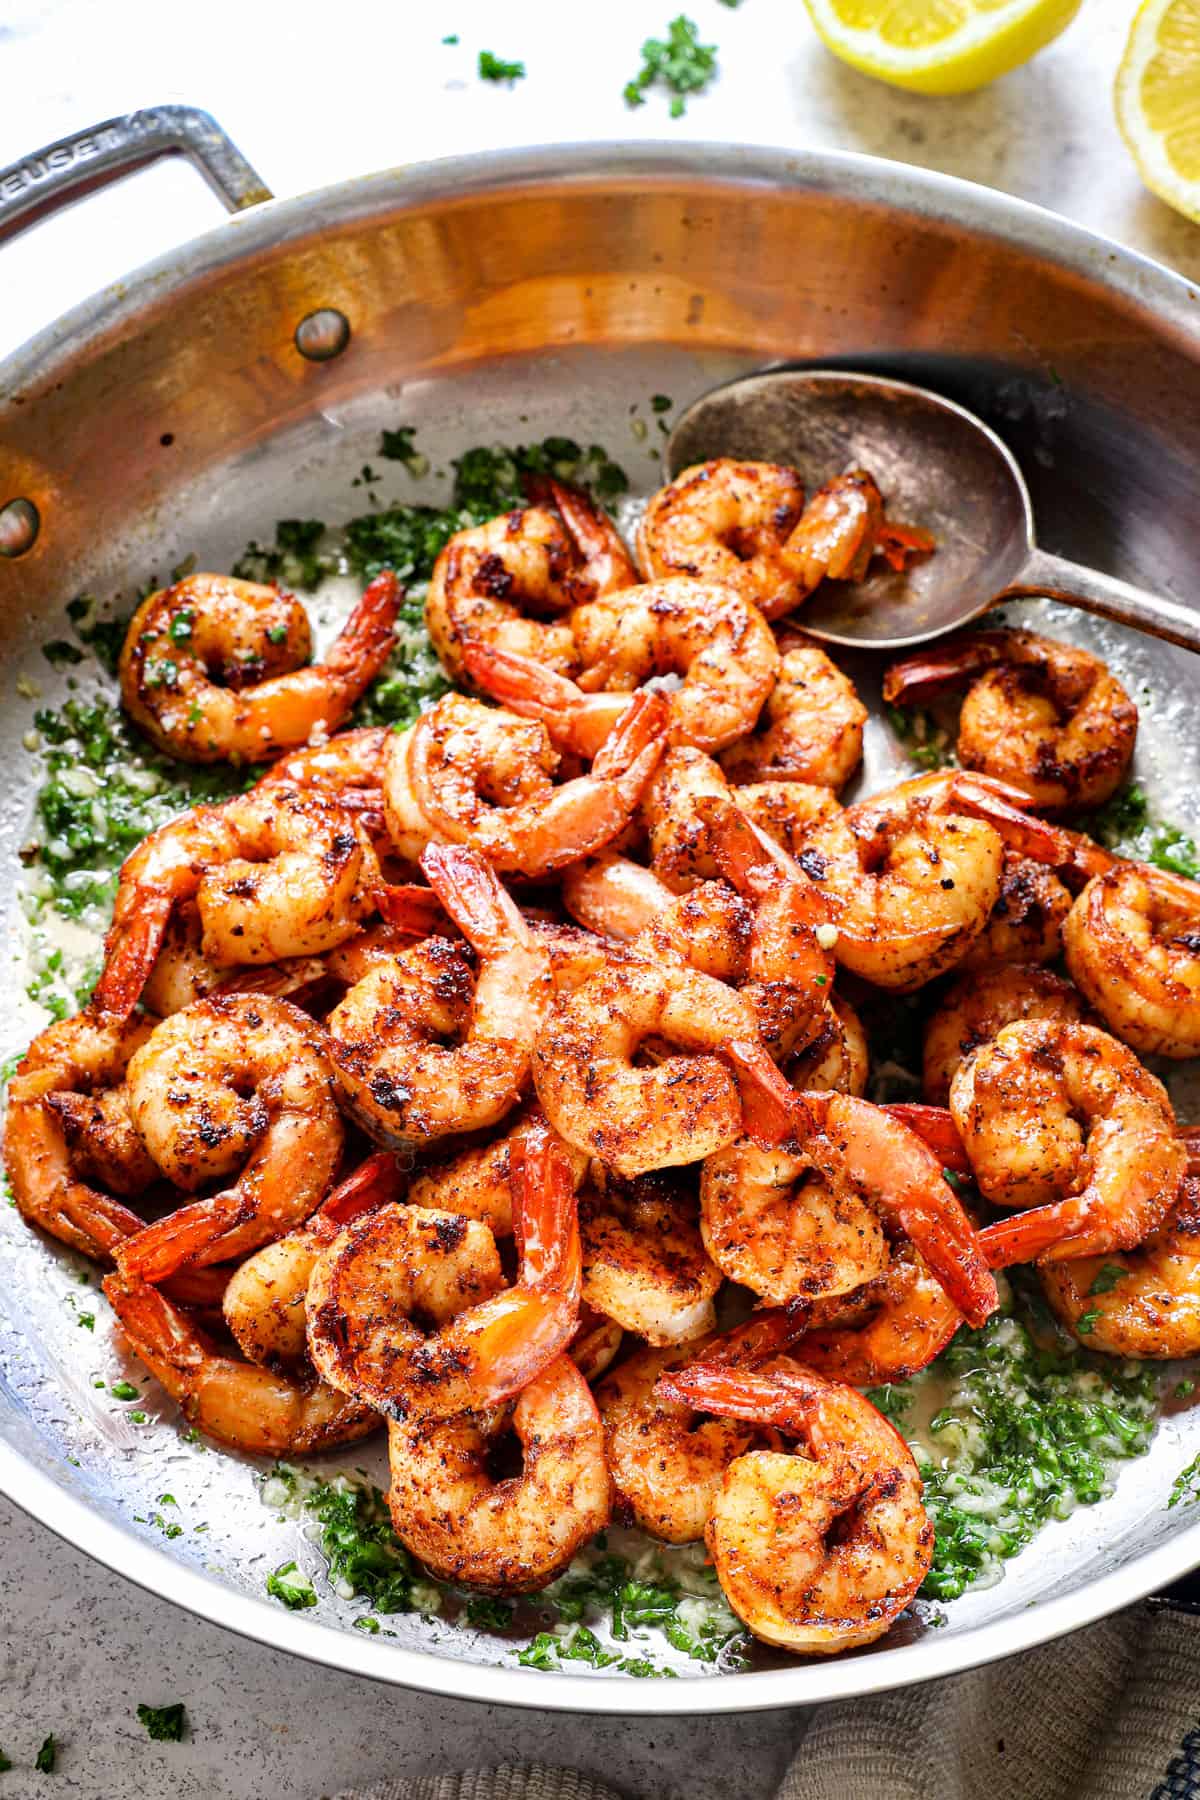 Cajun style shrimp being cooked in a skillet